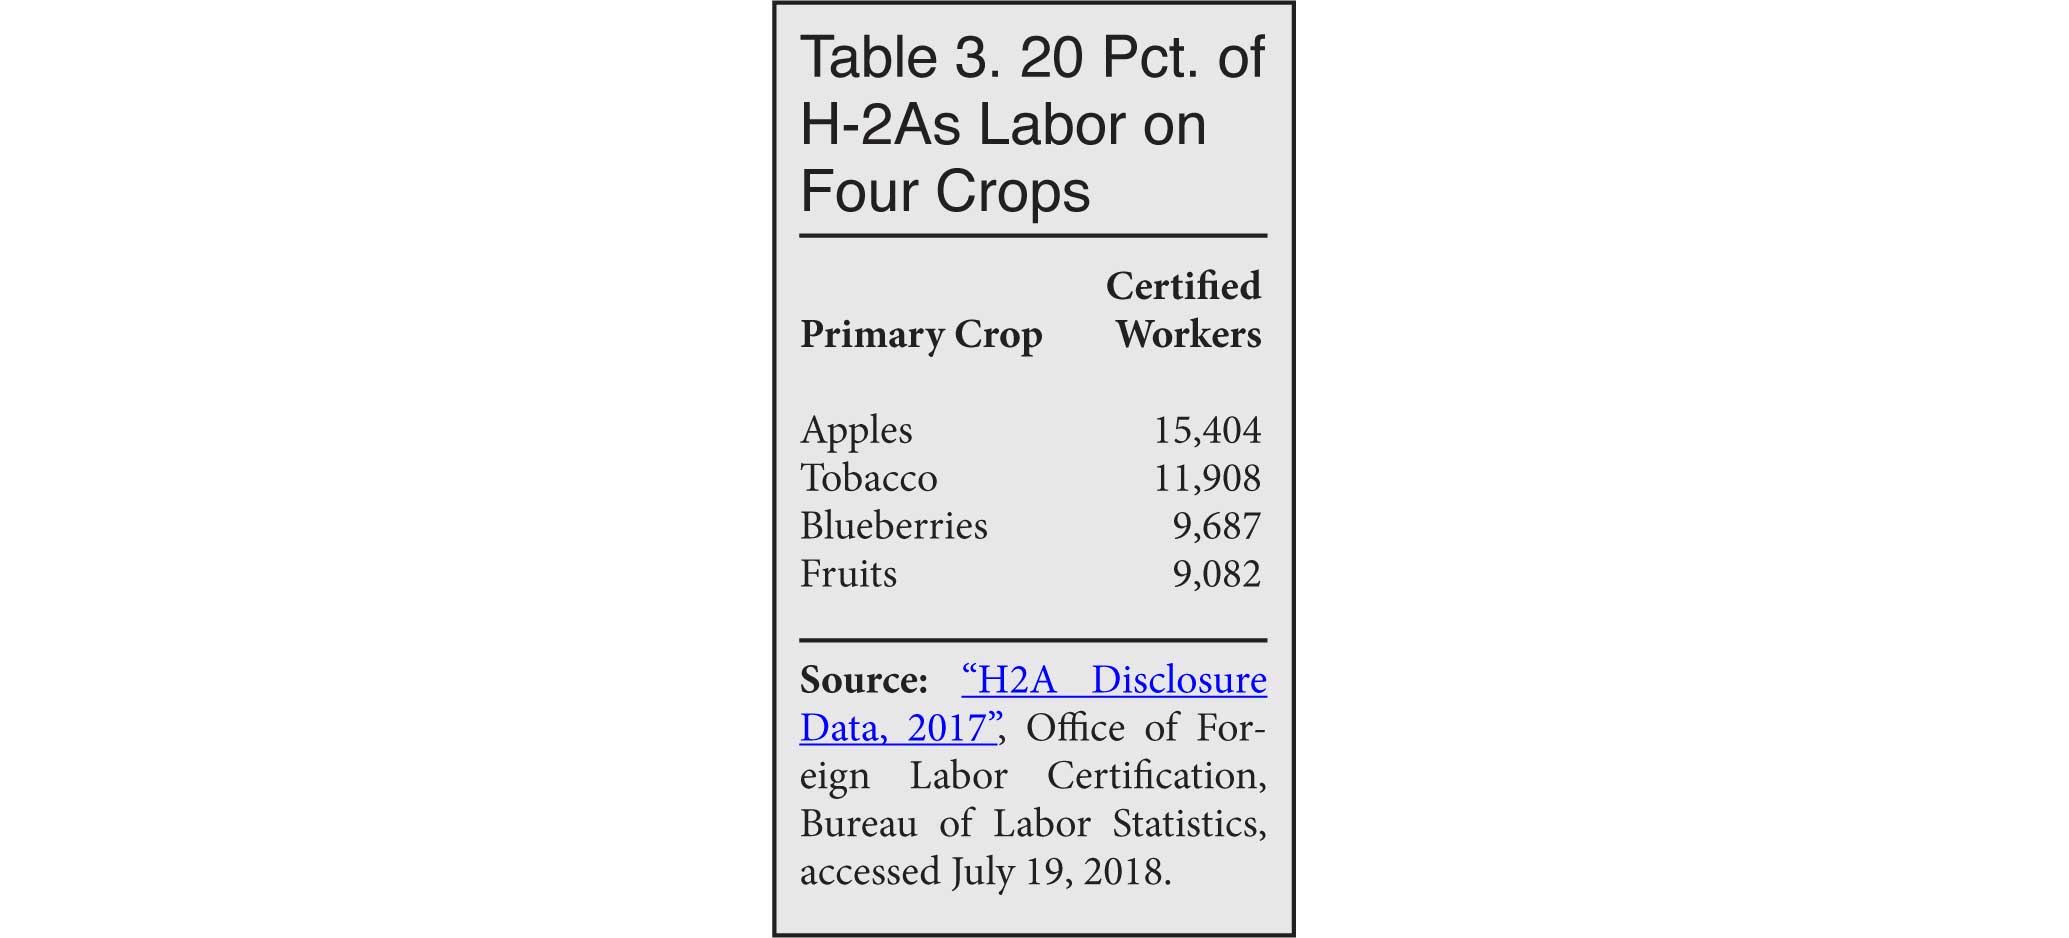 Table: 20% of H-2As Labor on Four Crops